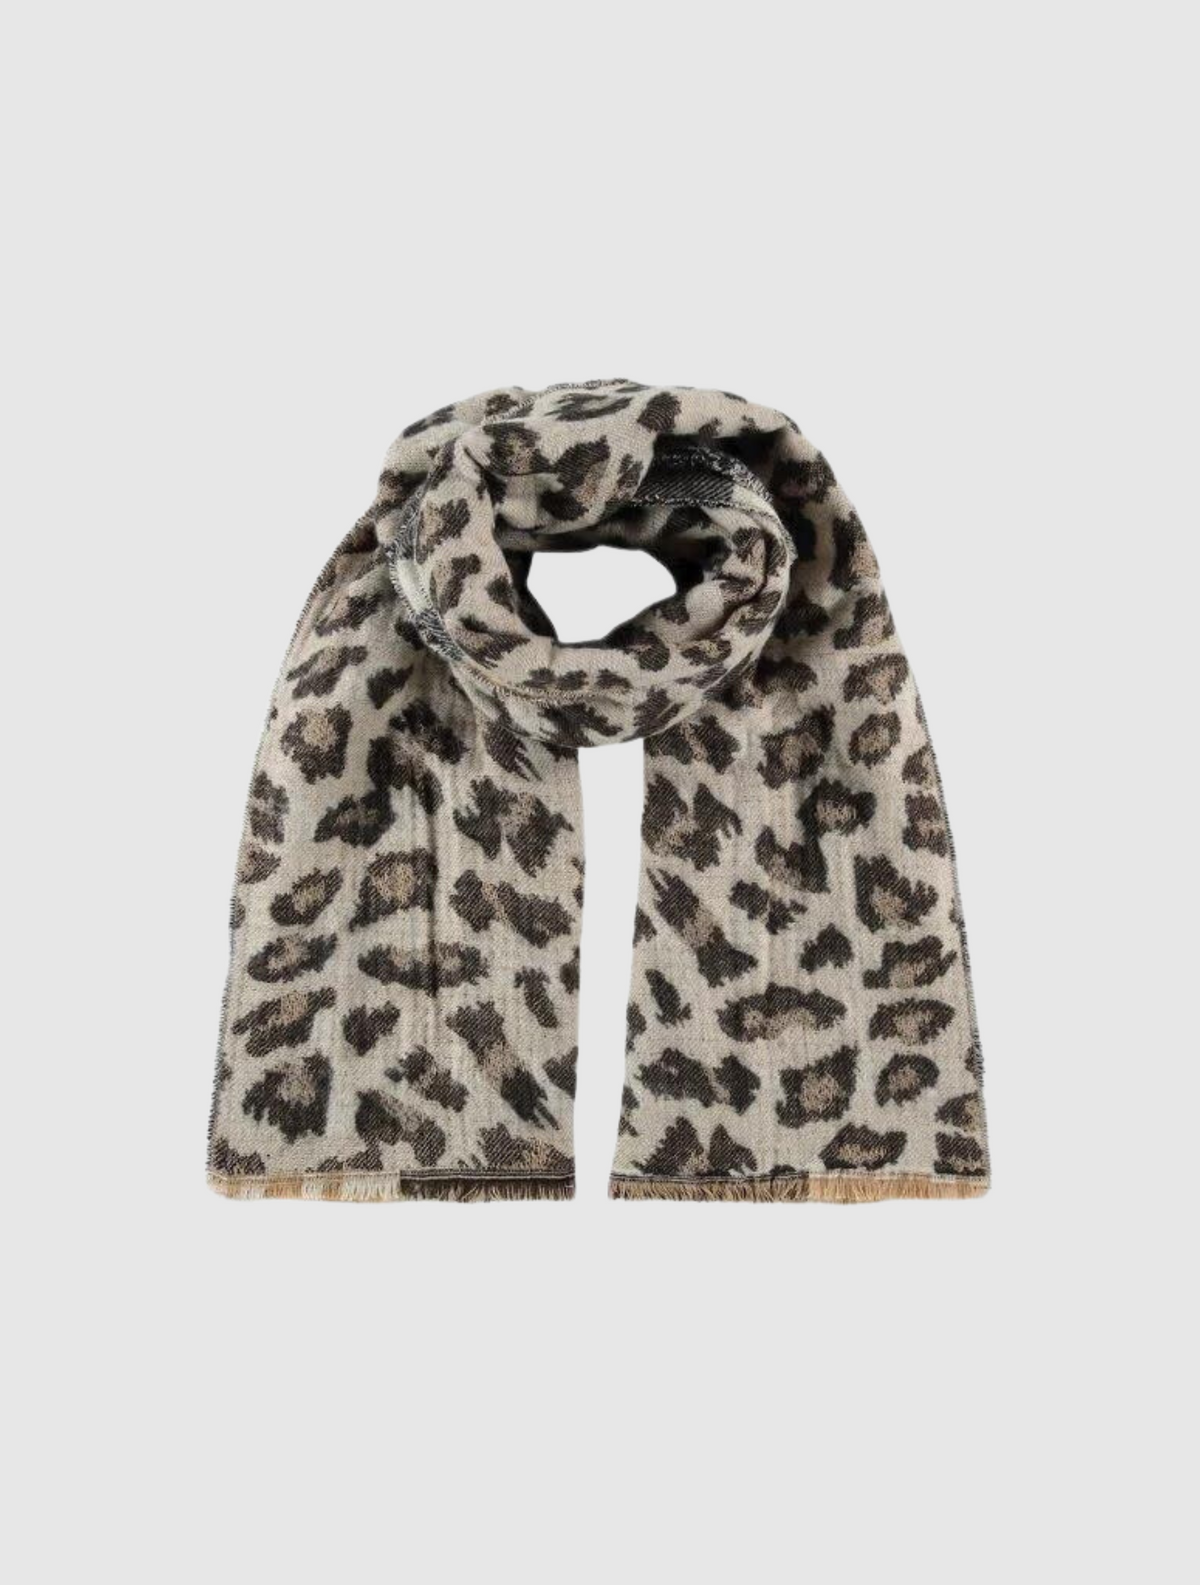 Reversible check and leopard print knitted scarf with tassels